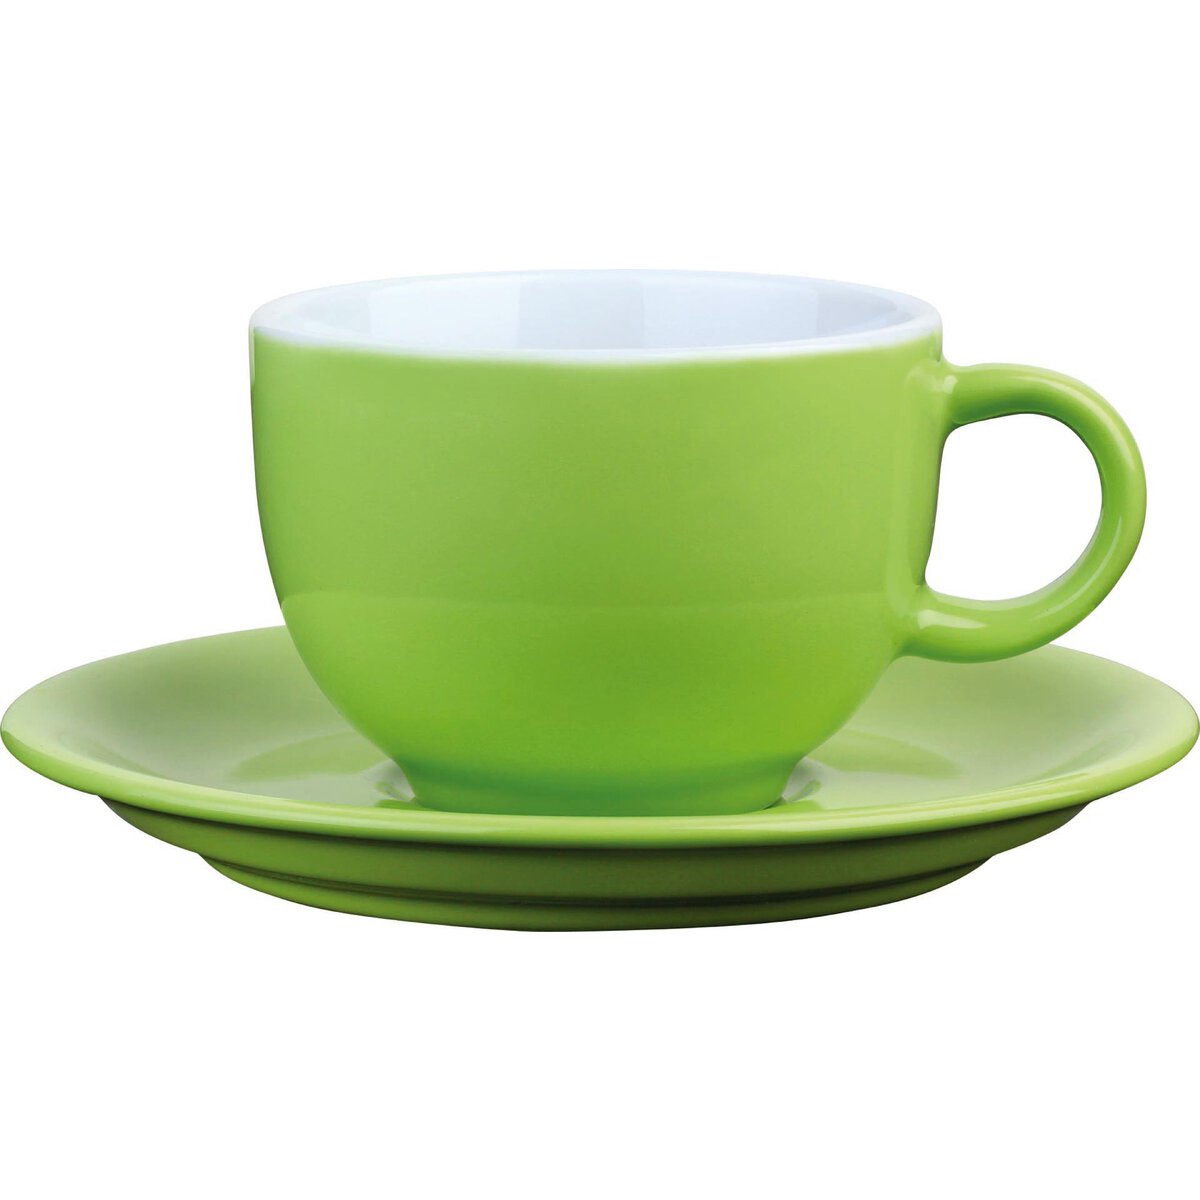 Kaffee-/Cappuccinotasse obere limette (1)